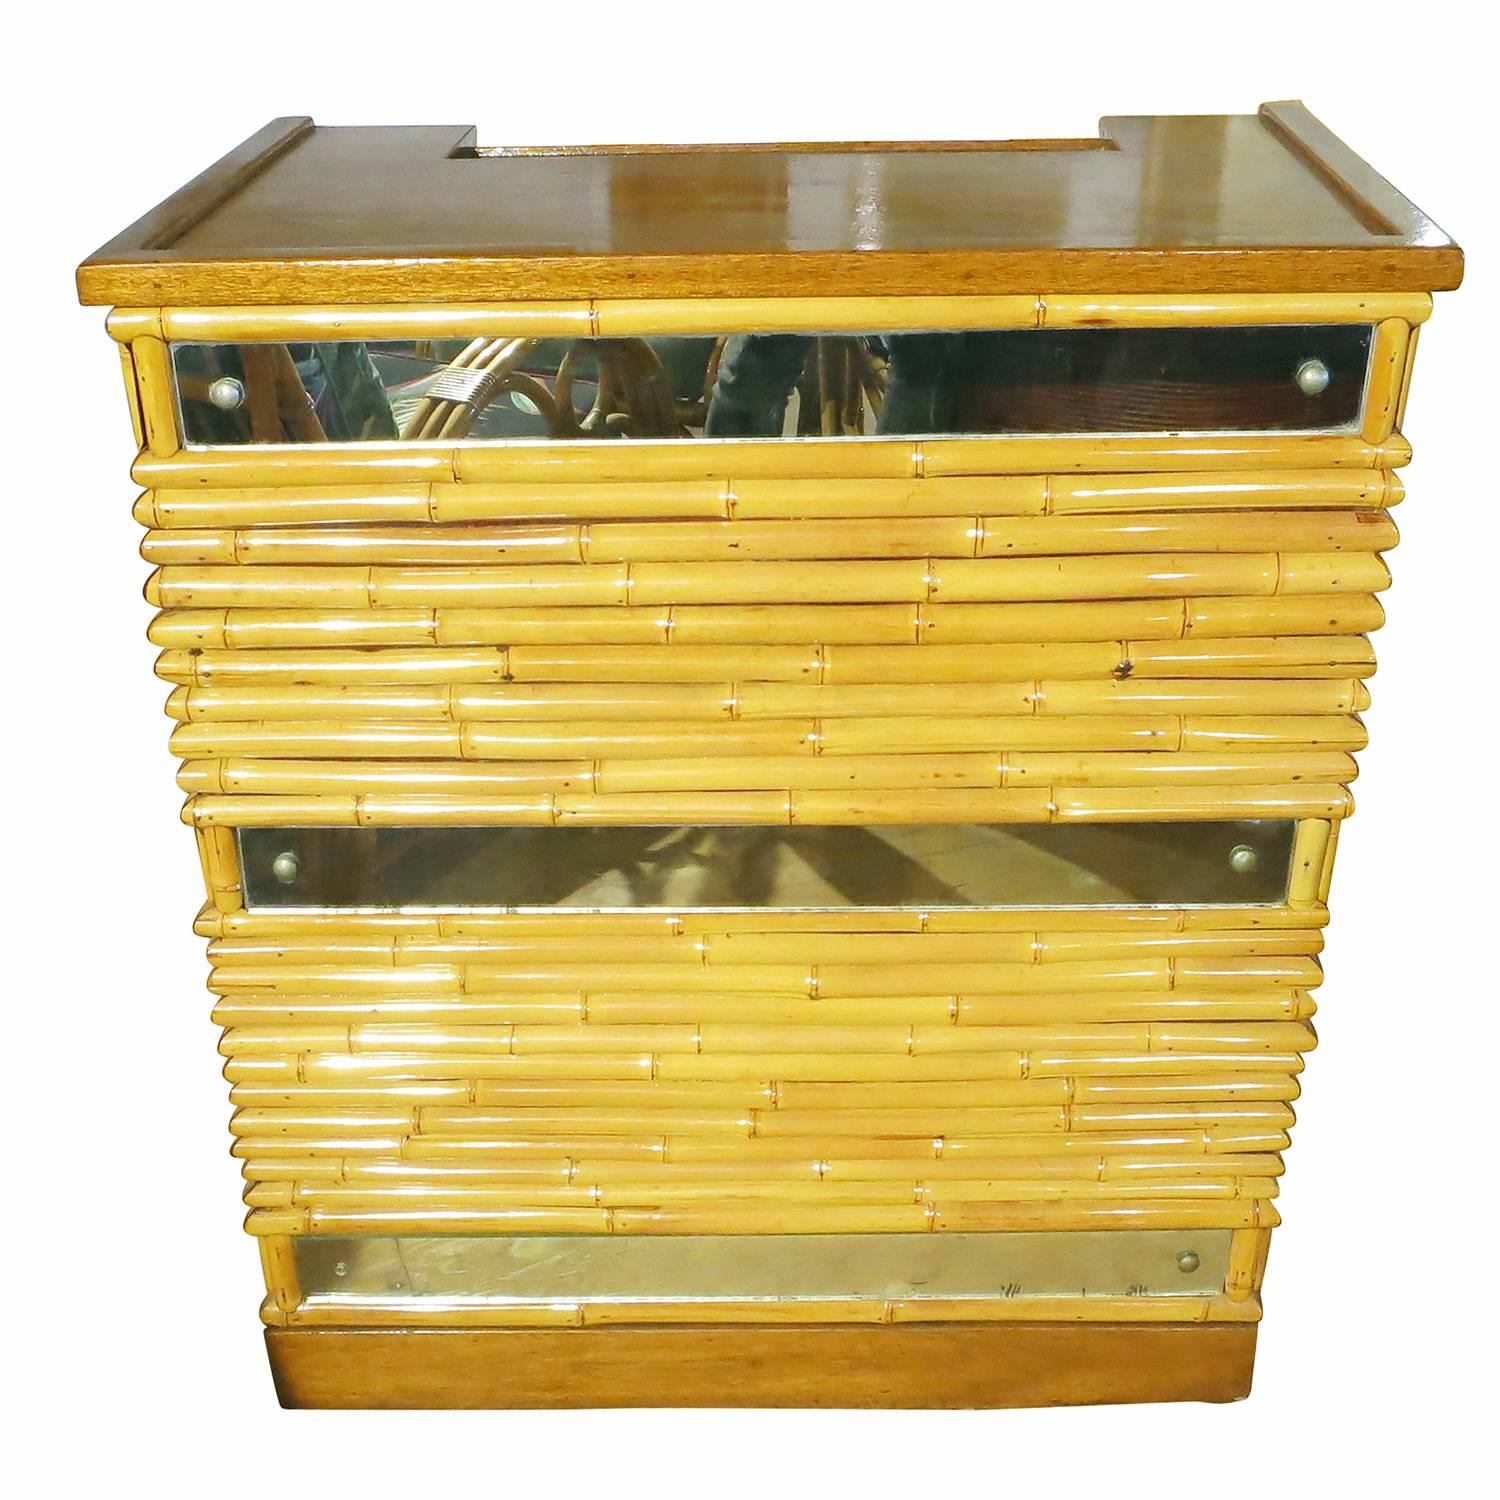 Unique, circa 1940 rattan bar made with a pole rattan front accented by cut-out mirror sections and solid Mahogany trim. Drinks are easily served from the two-tier solid mahogany top which easily keeps spirit bottles and drinking glasses separate.